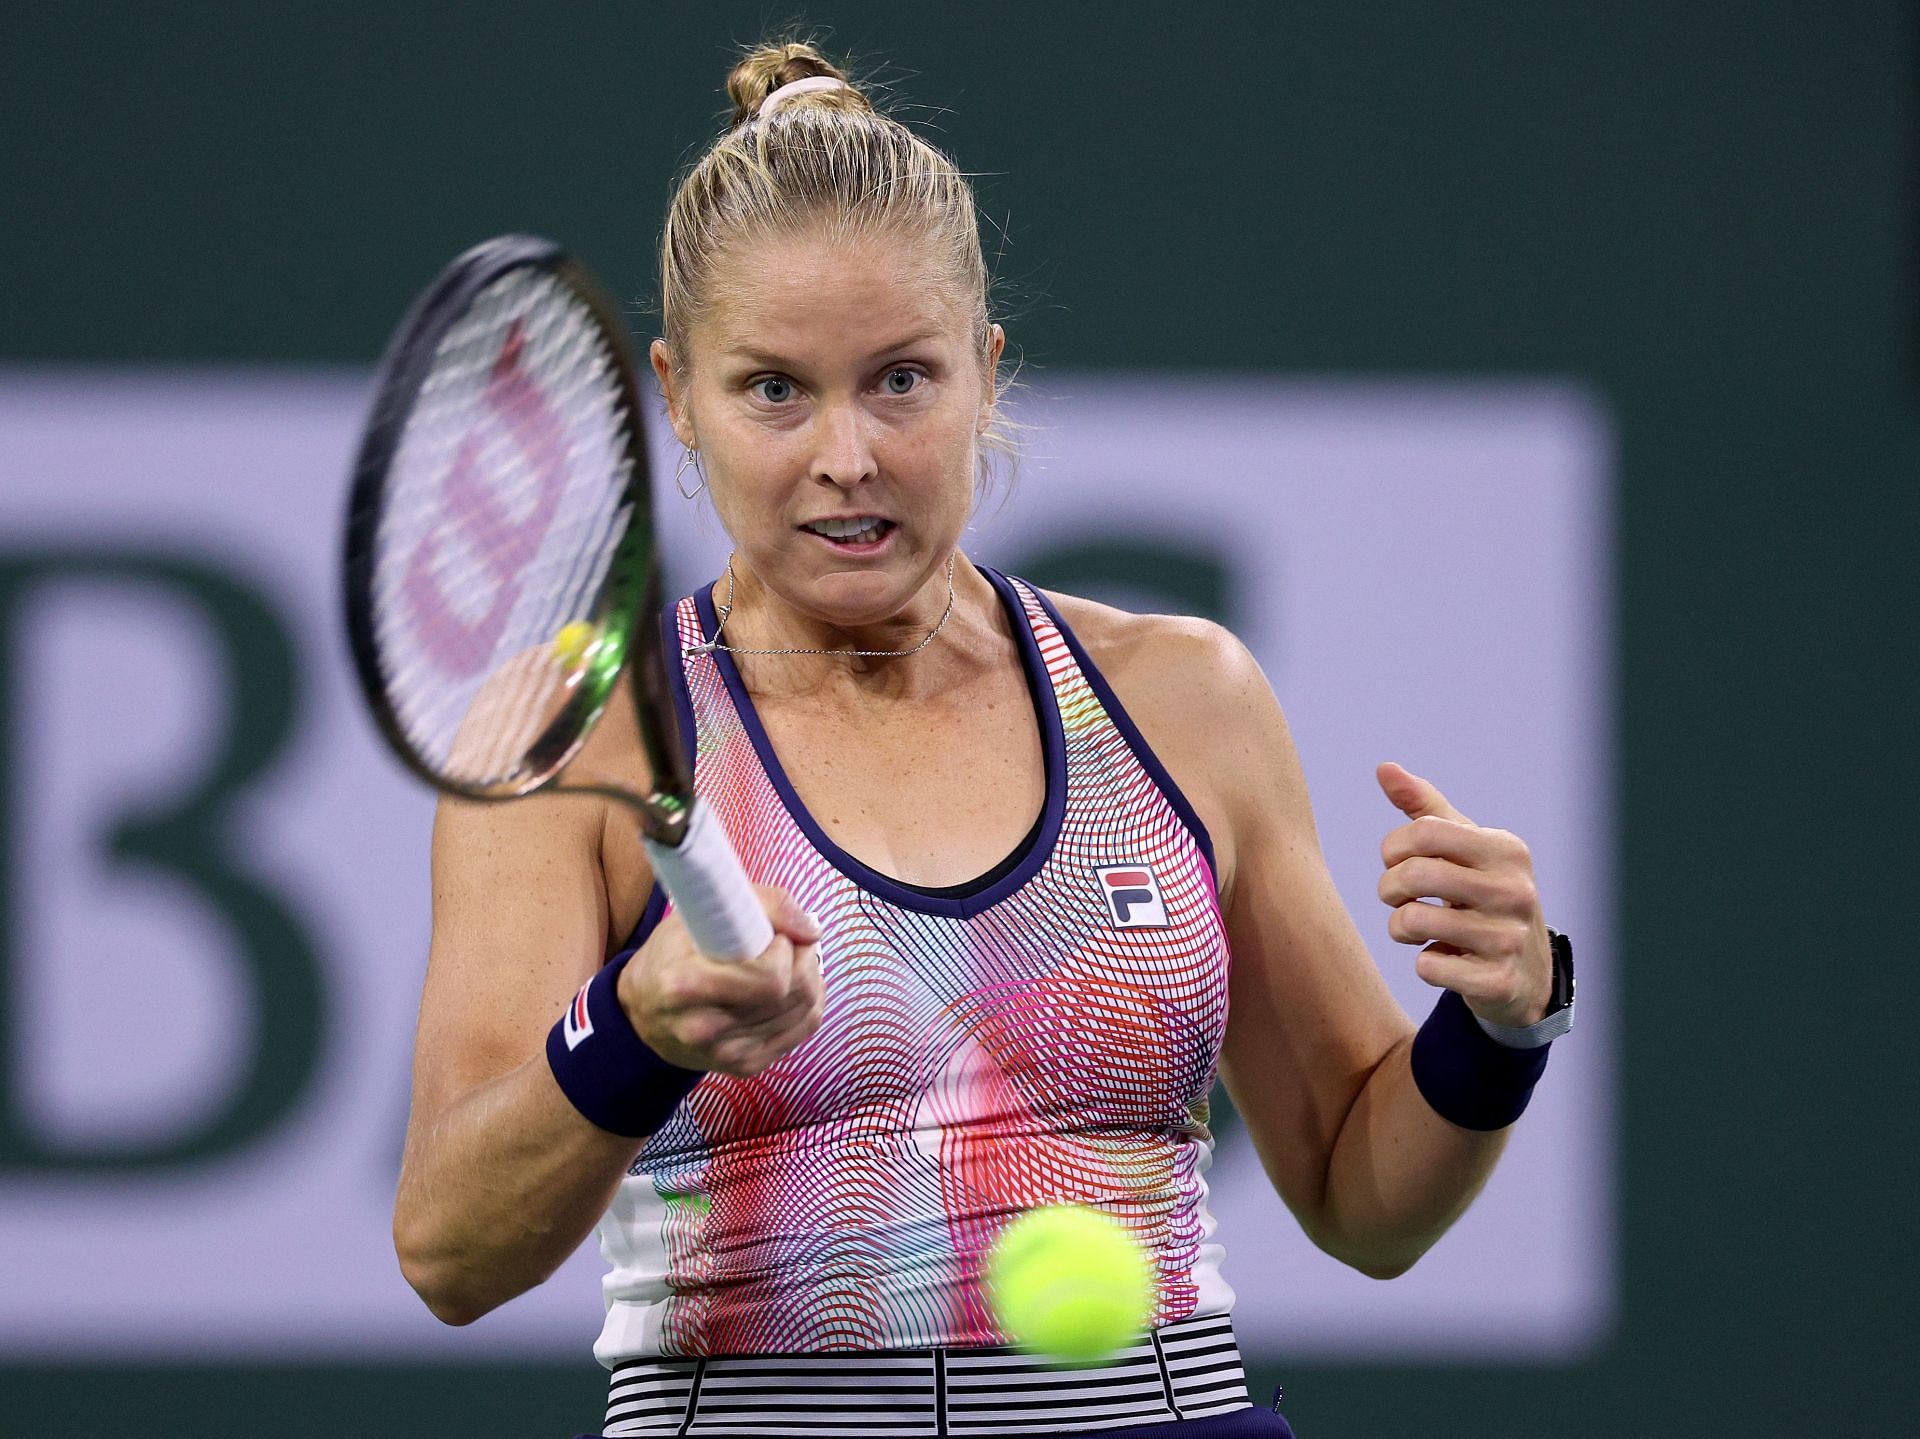 Shelby Rogers in action at the BNP Paribas Open